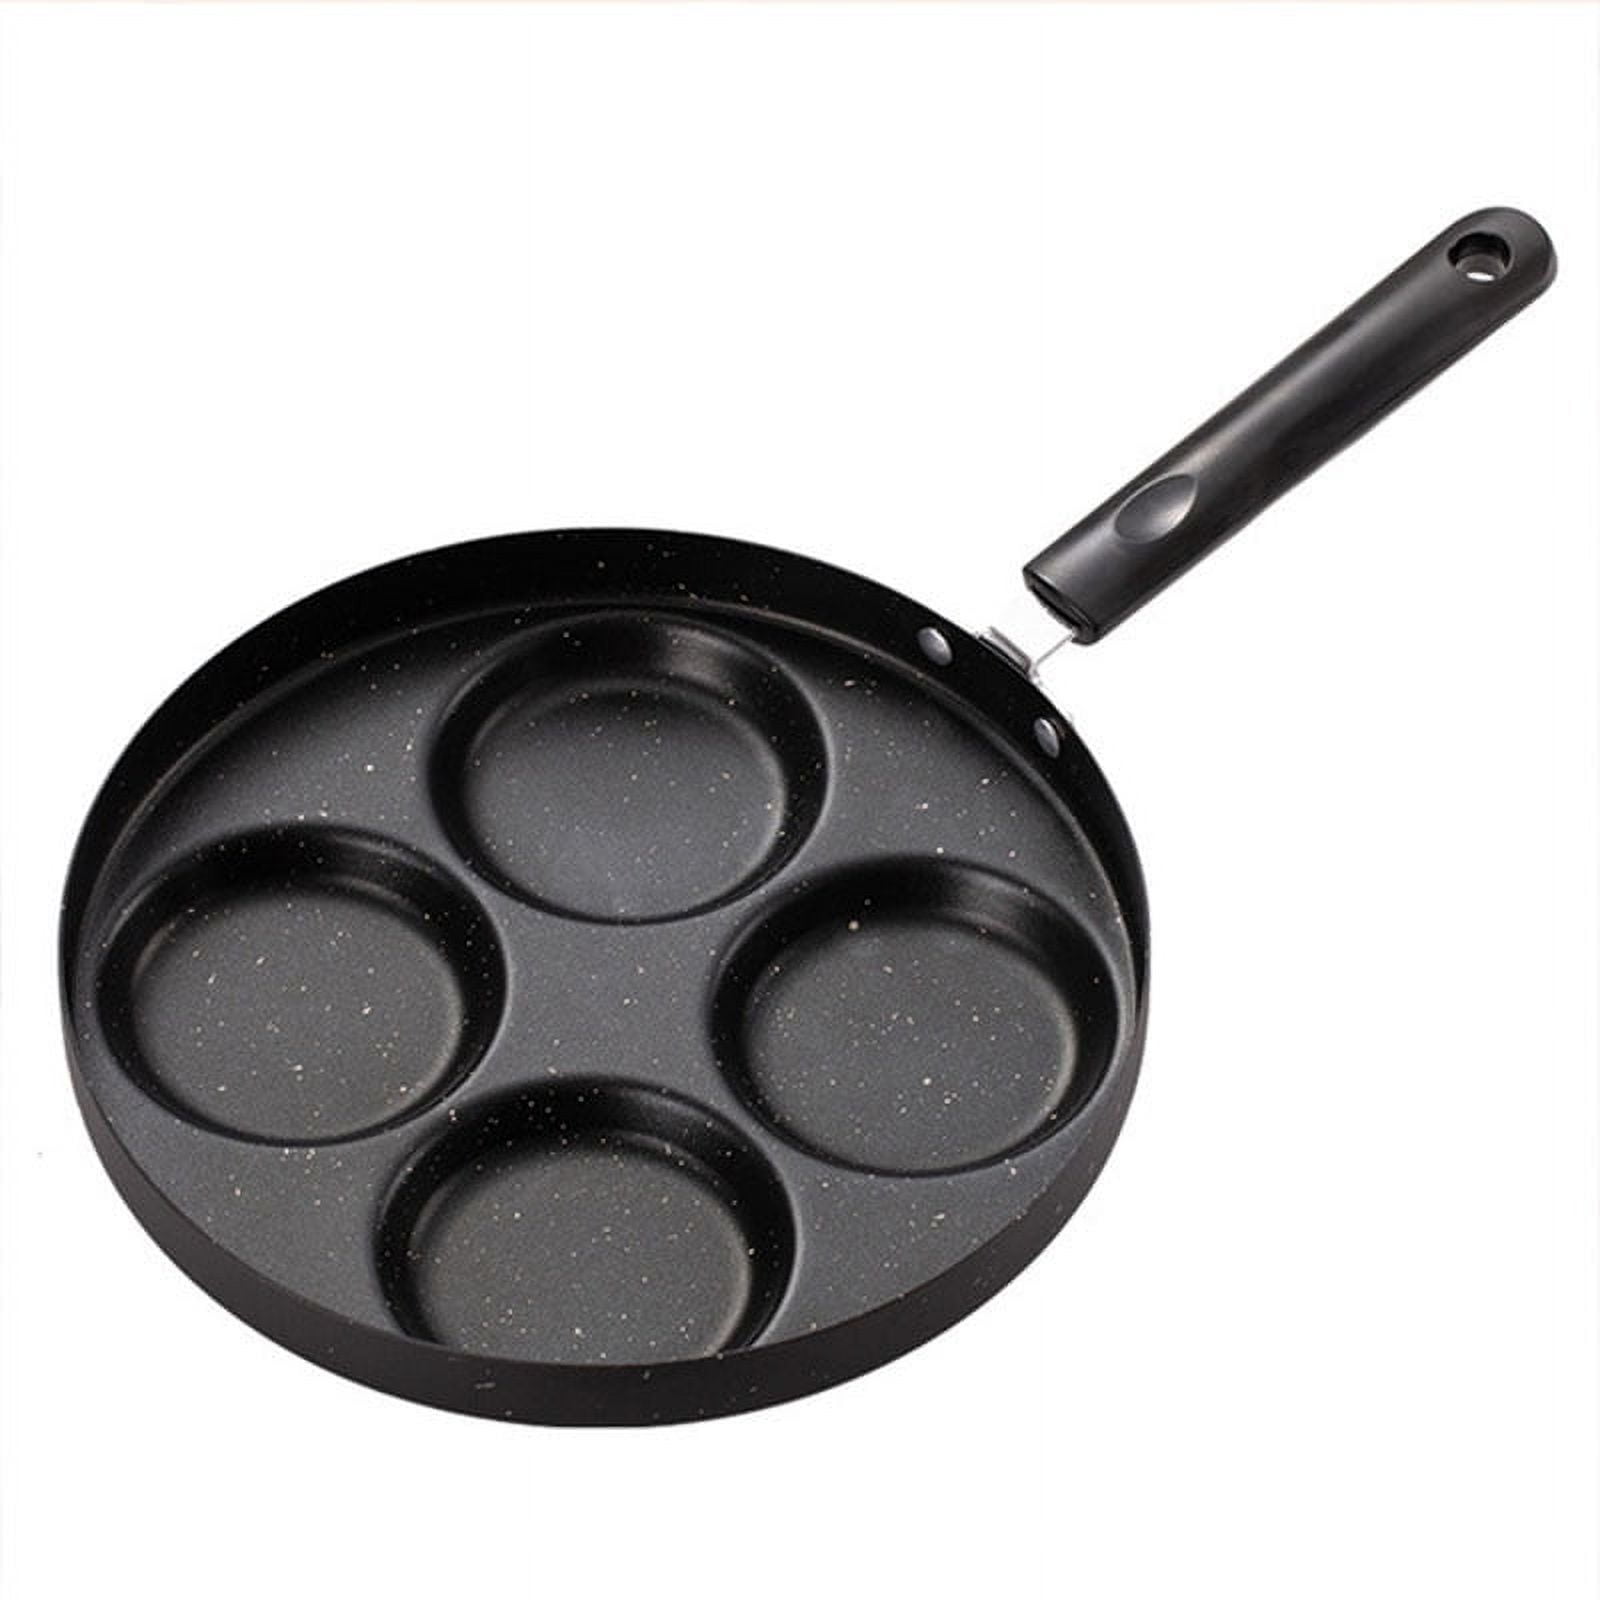  NINGVIHE Egg Pan,Non Stick Frying Pan,Skillet Pans for  Cooking,Multi Egg Cooker Pan for Breakfast,Safe Non-stick Coating(Round):  Home & Kitchen